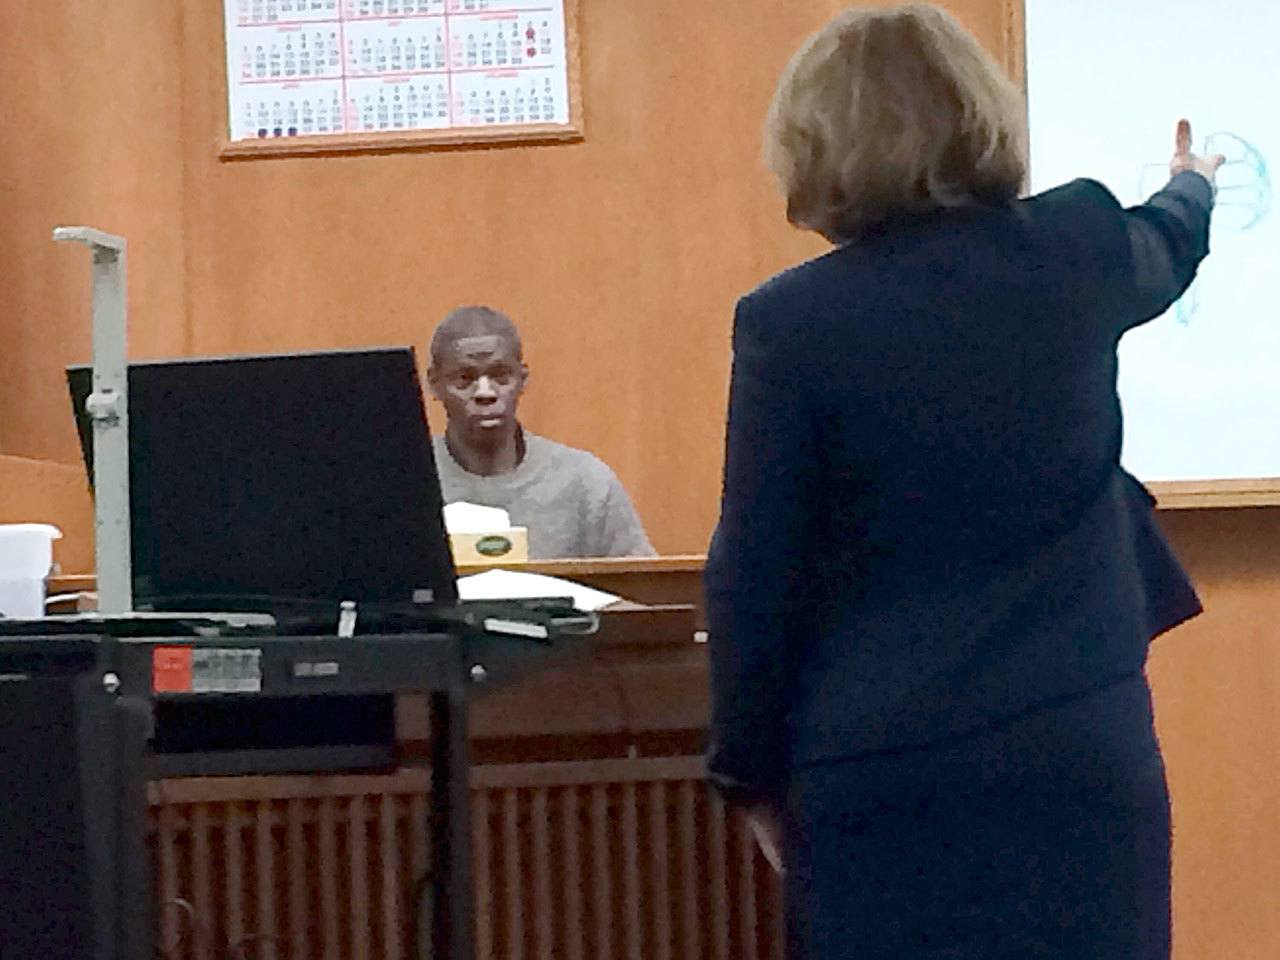 Keith Roberson, charged with first- and second-degree assault, claimed he fired a gun in self-defense when he testified at his trial this week. (Paul Gottlieb/Peninsula Daily News)